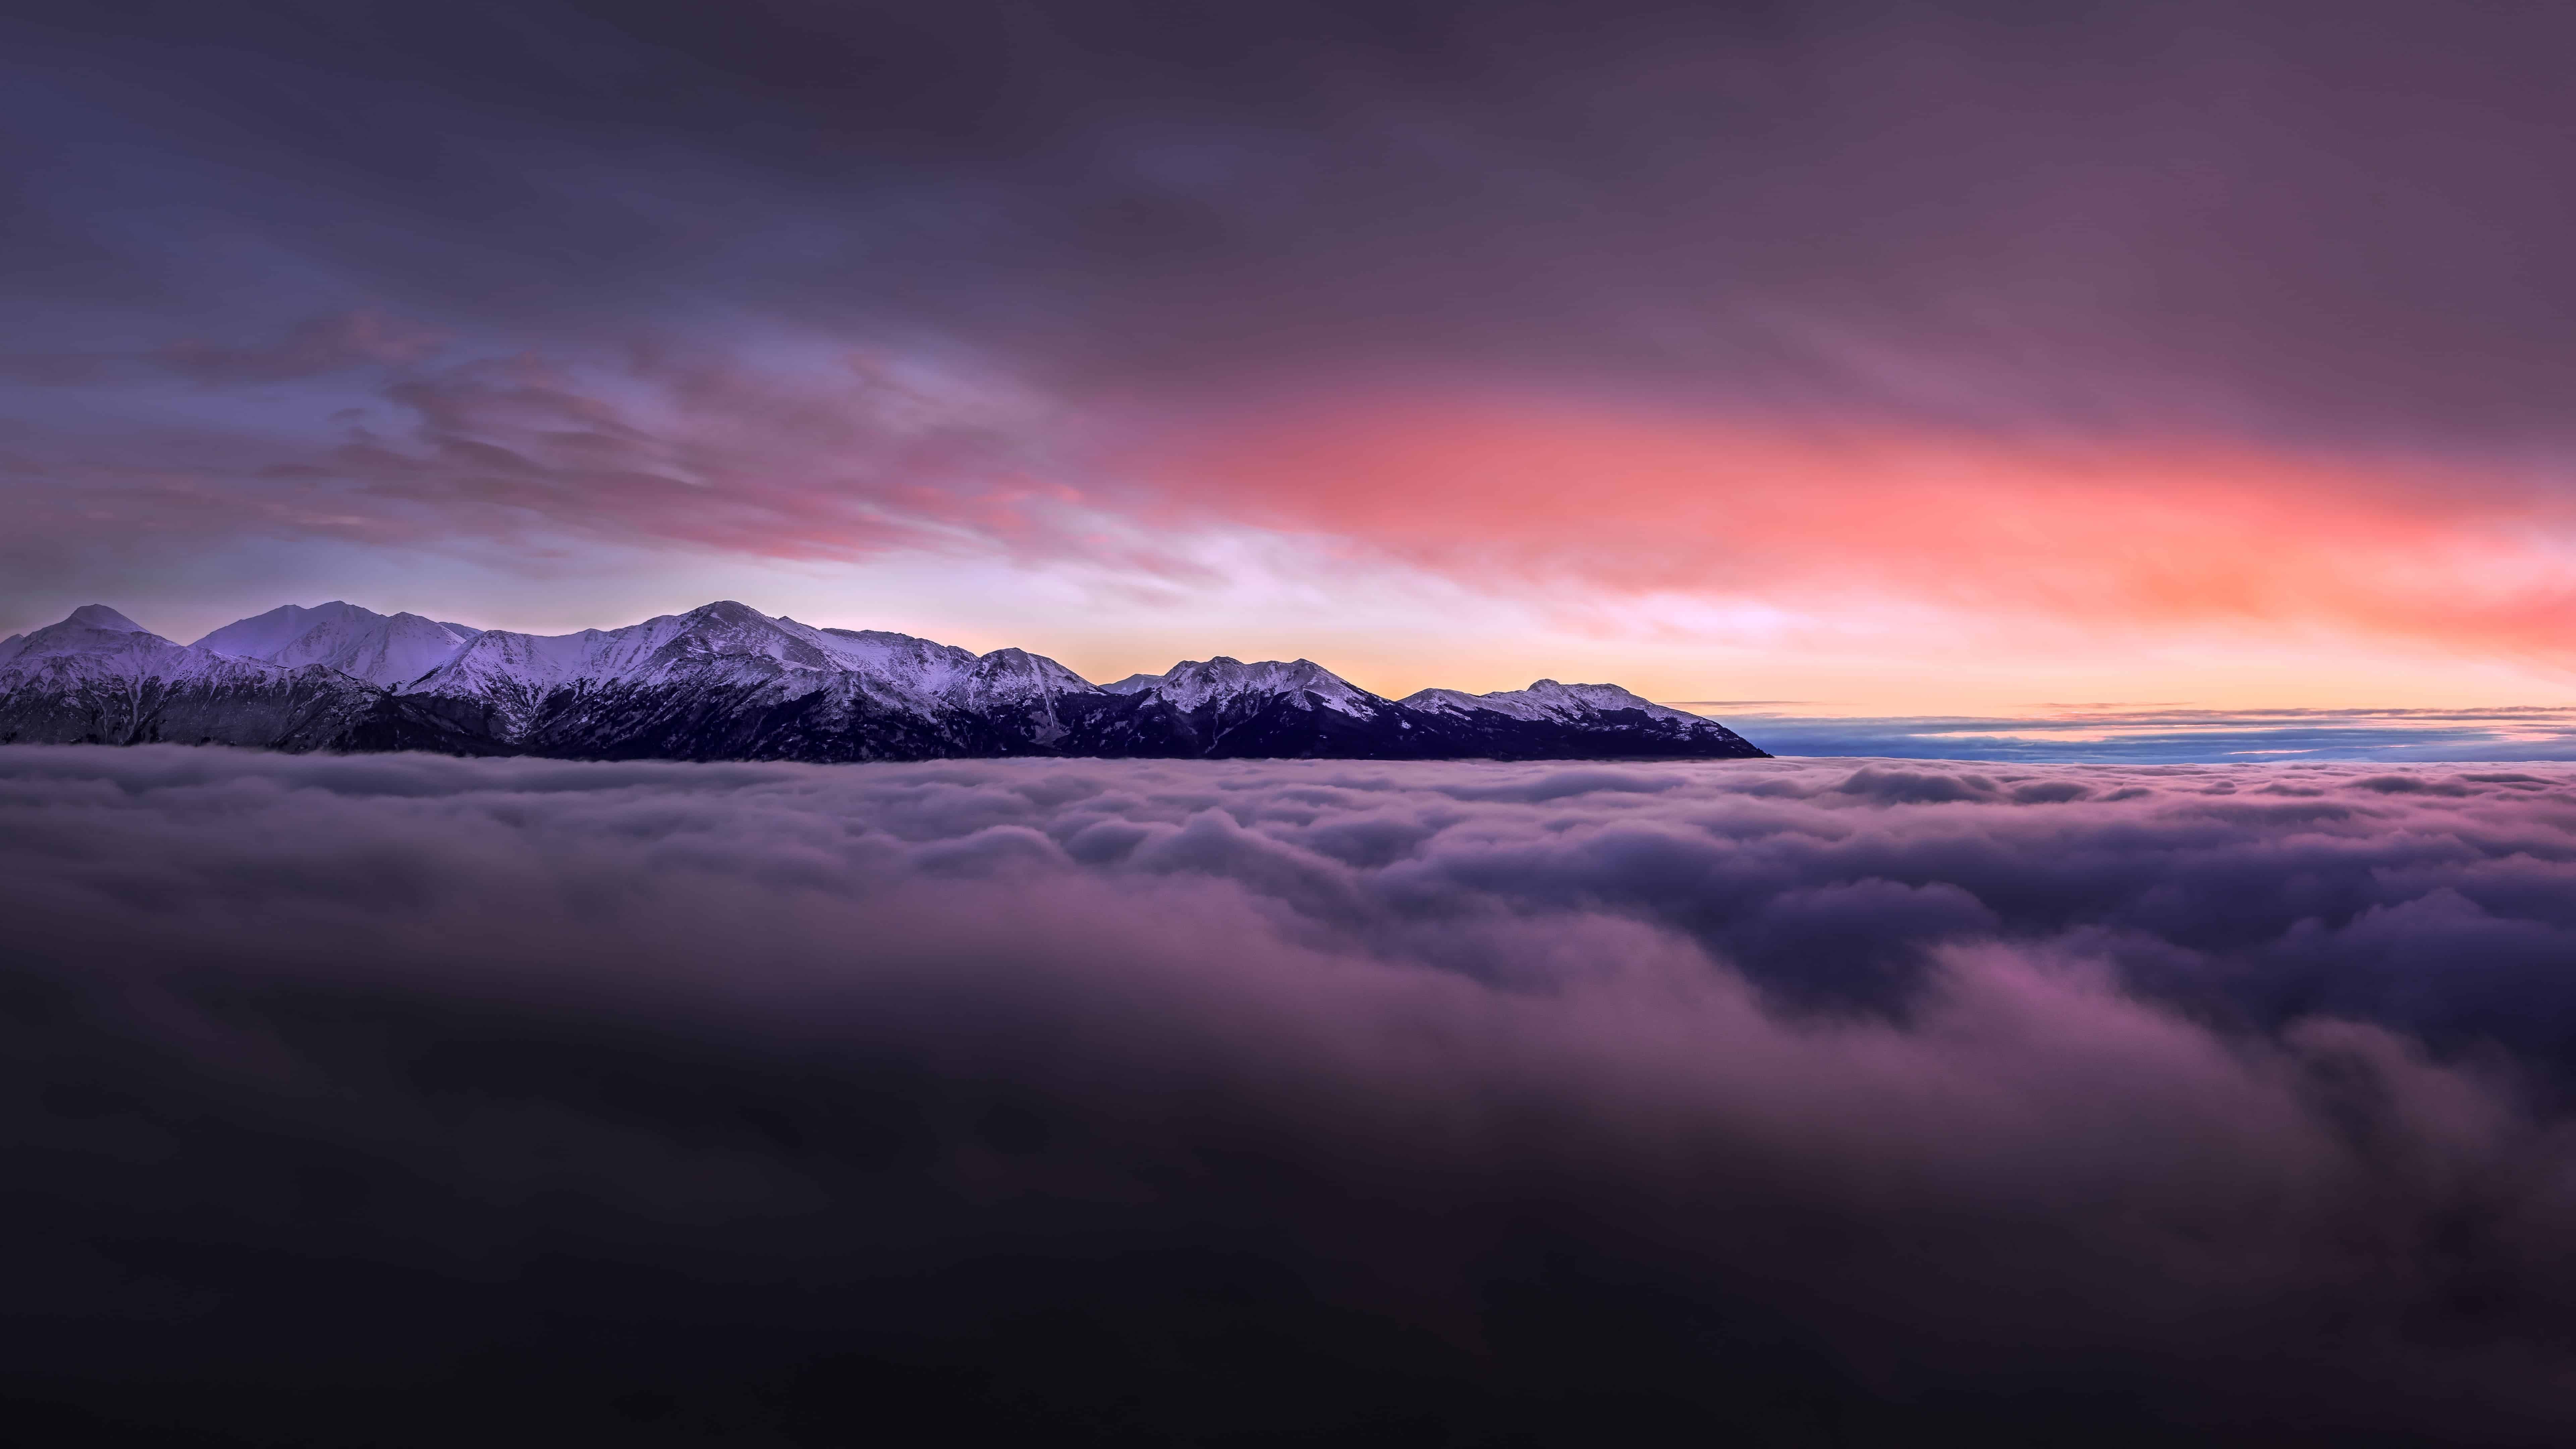 Sunset With Mountains Above Clouds. Wallpaper pc, Sunset wallpaper, Cool wallpaper for pc